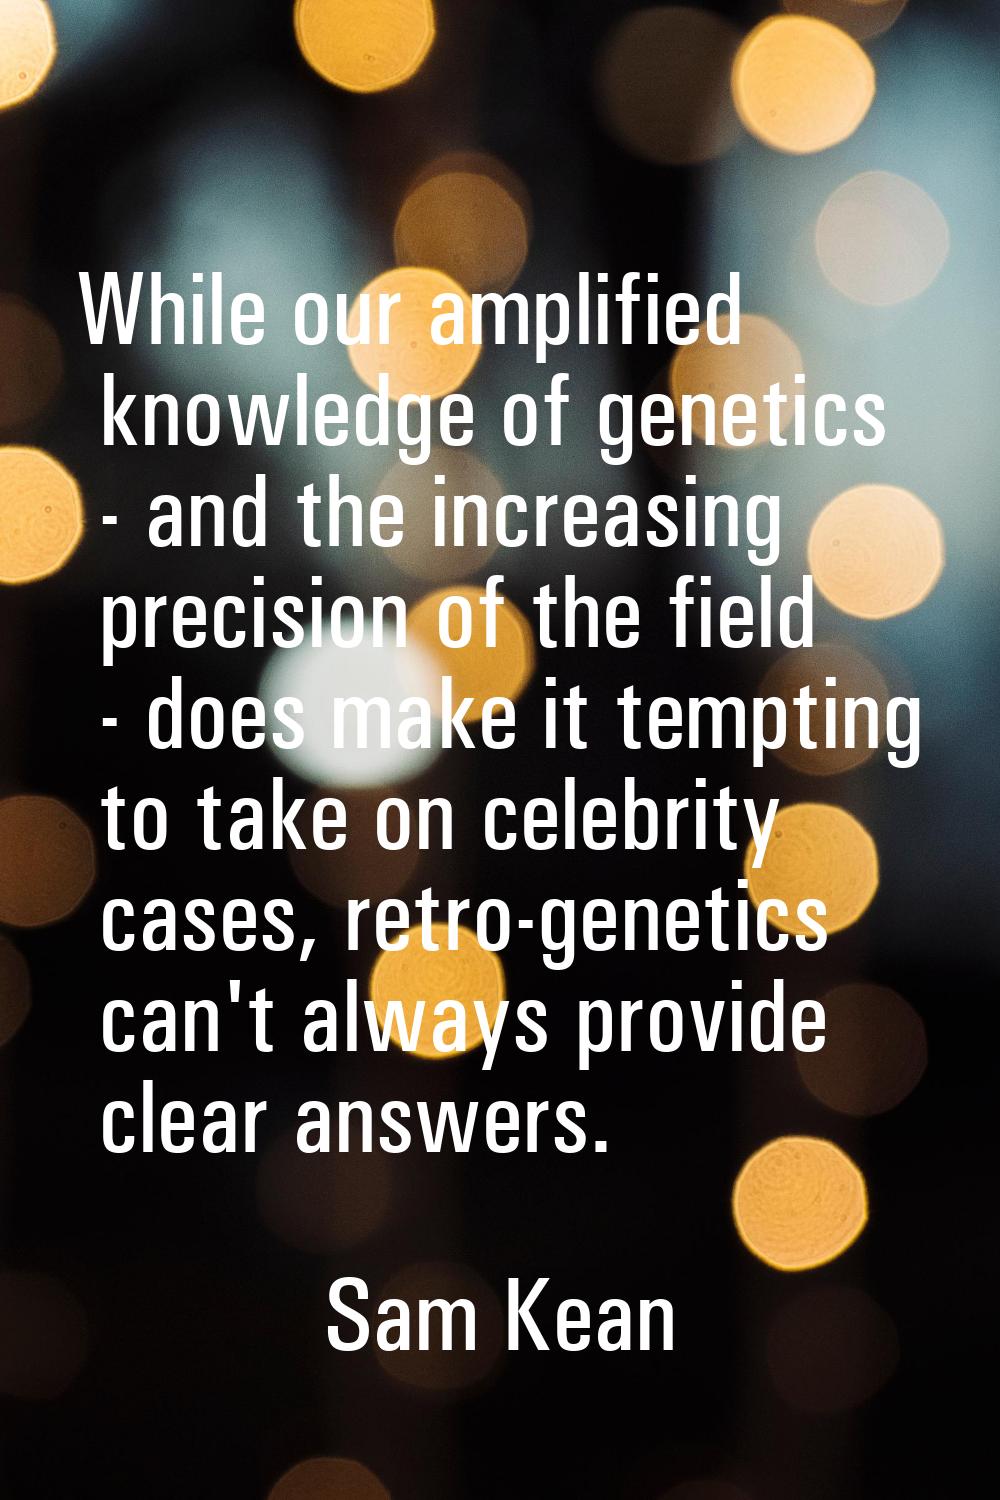 While our amplified knowledge of genetics - and the increasing precision of the field - does make i